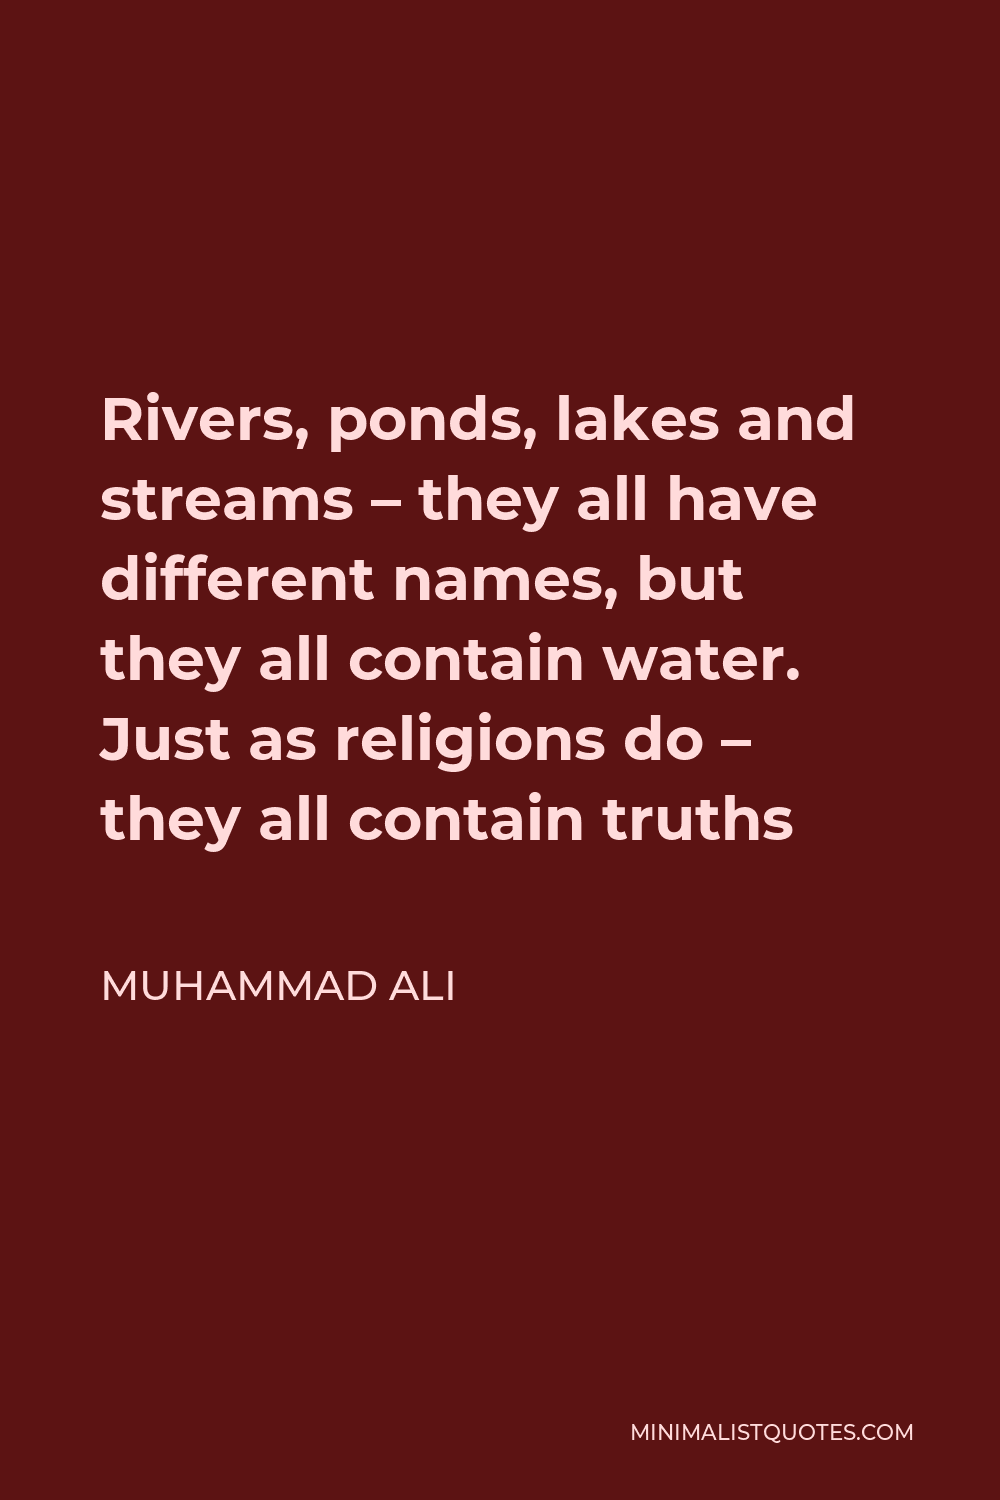 Muhammad Ali Quote - Rivers, ponds, lakes and streams – they all have different names, but they all contain water. Just as religions do – they all contain truths